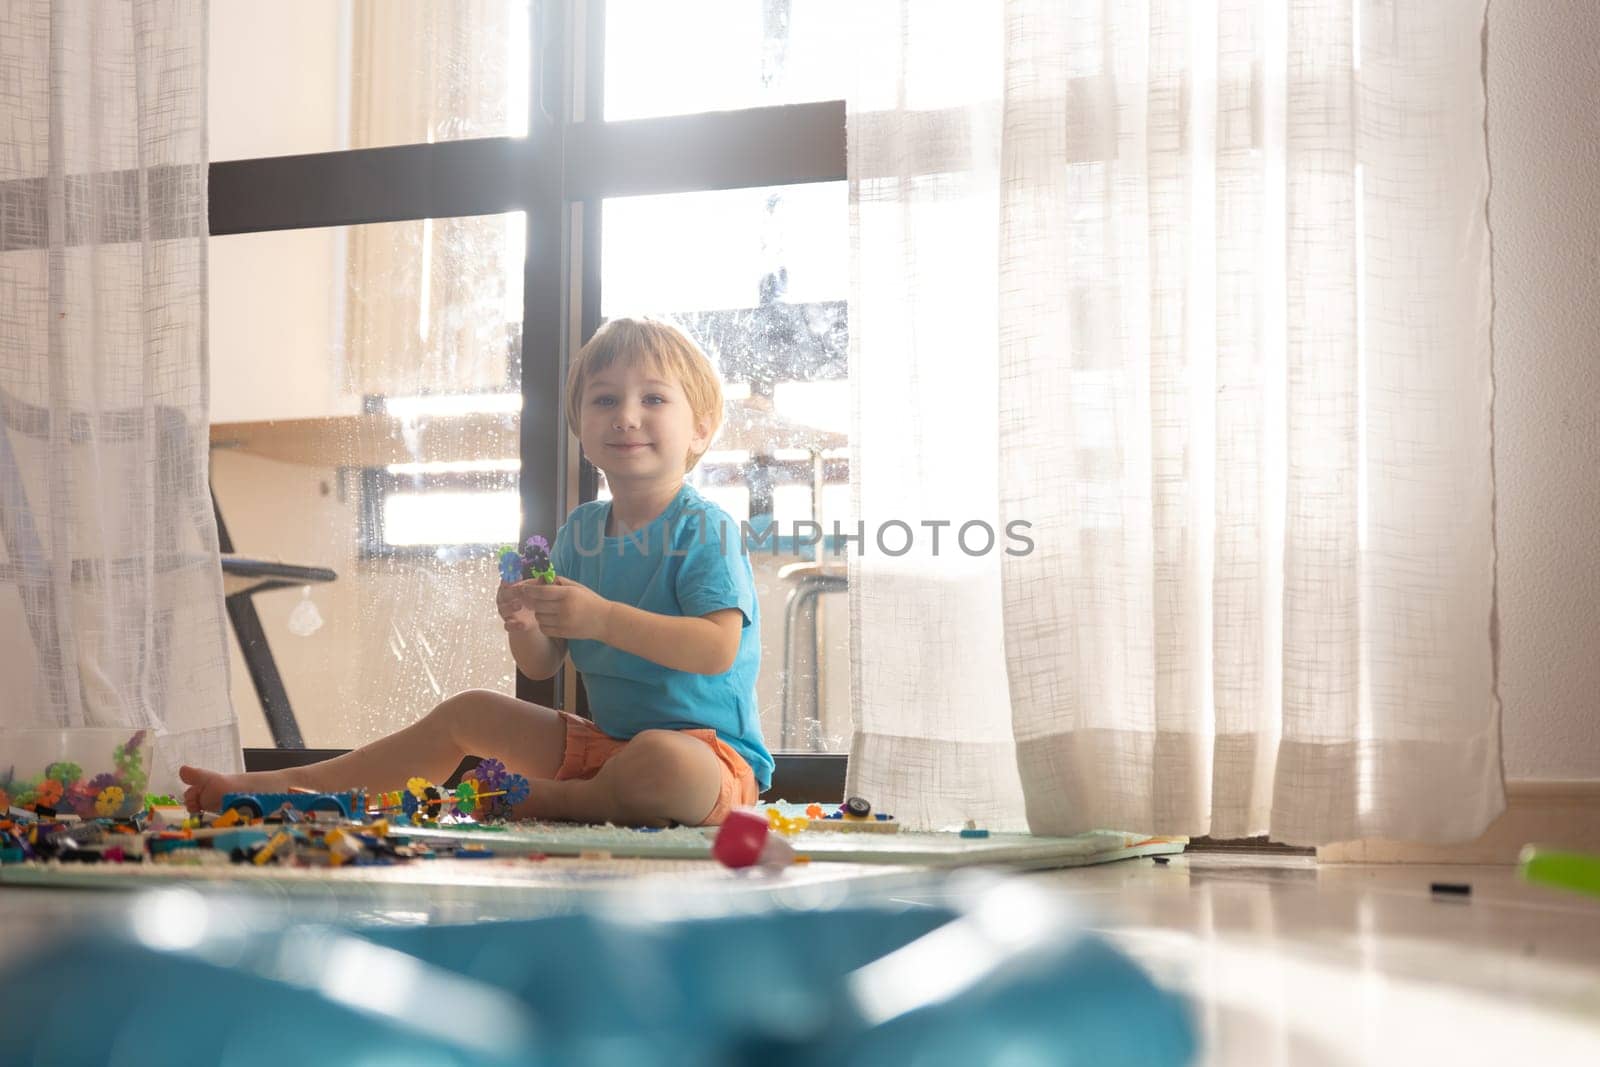 A little boy sitting on the floor playing with toys